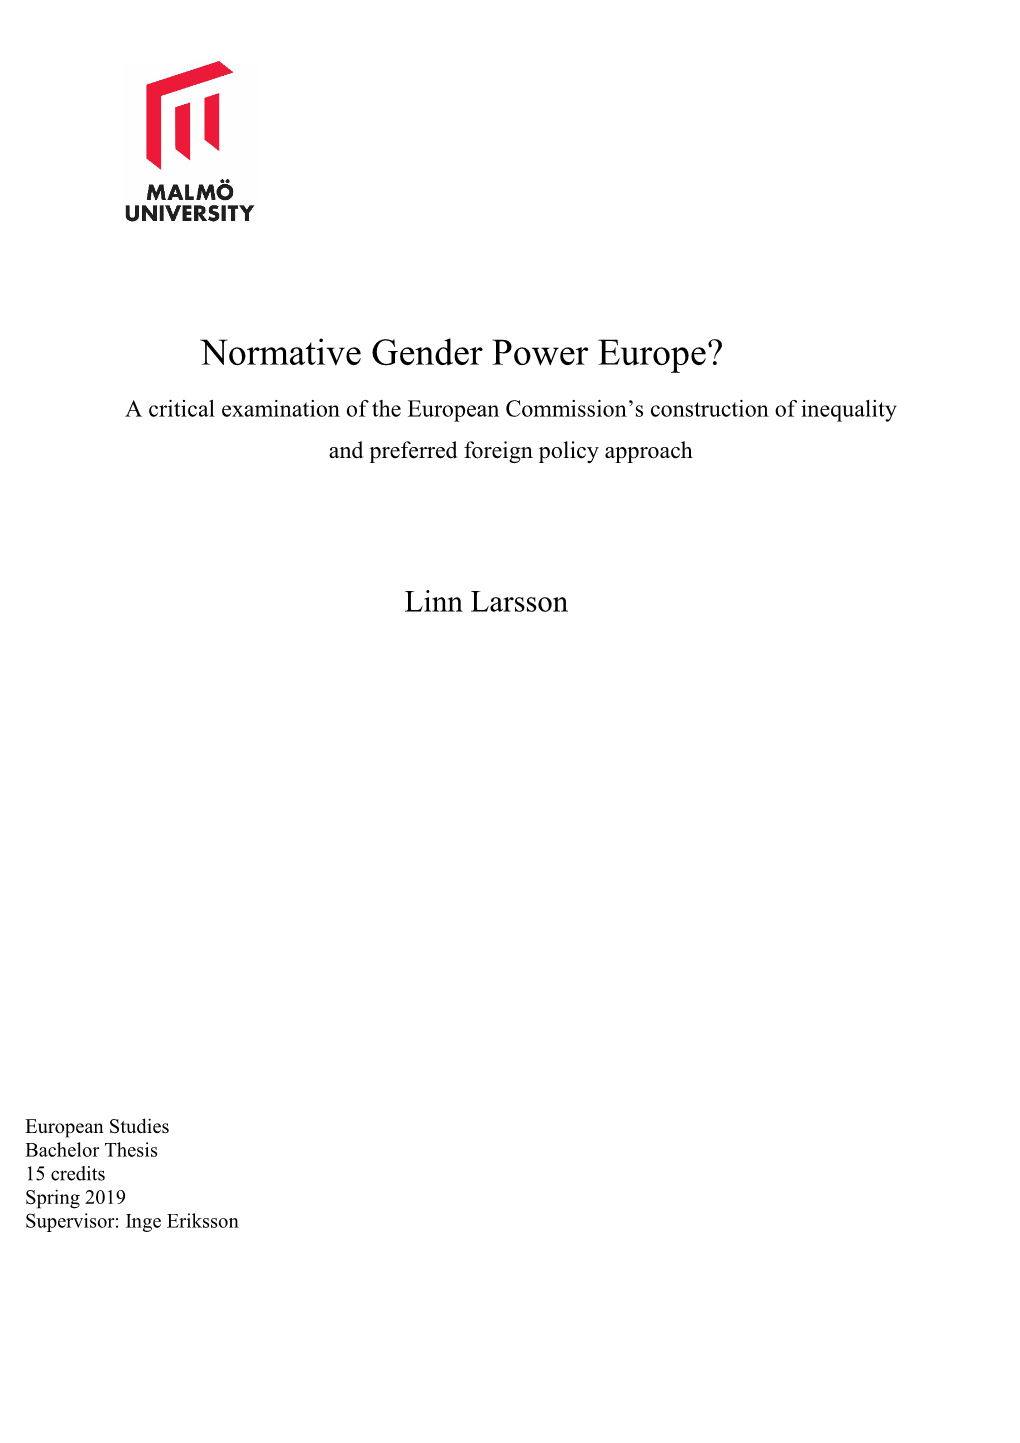 Normative Gender Power Europe? a Critical Examination of the European Commission’S Construction of Inequality and Preferred Foreign Policy Approach